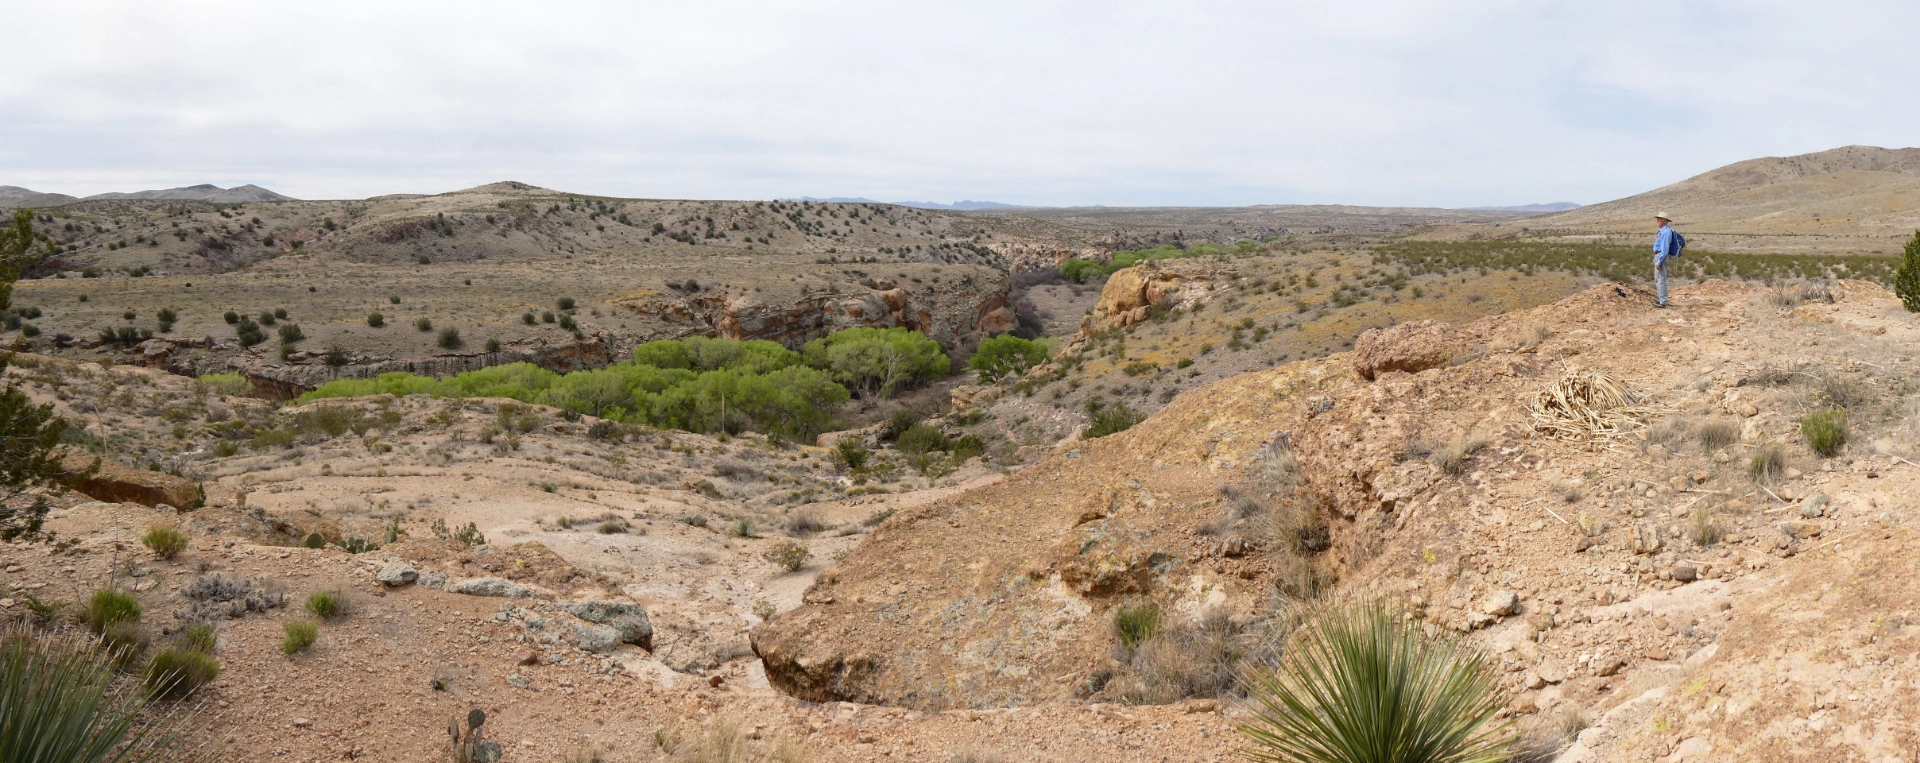 view of the Gila river valley